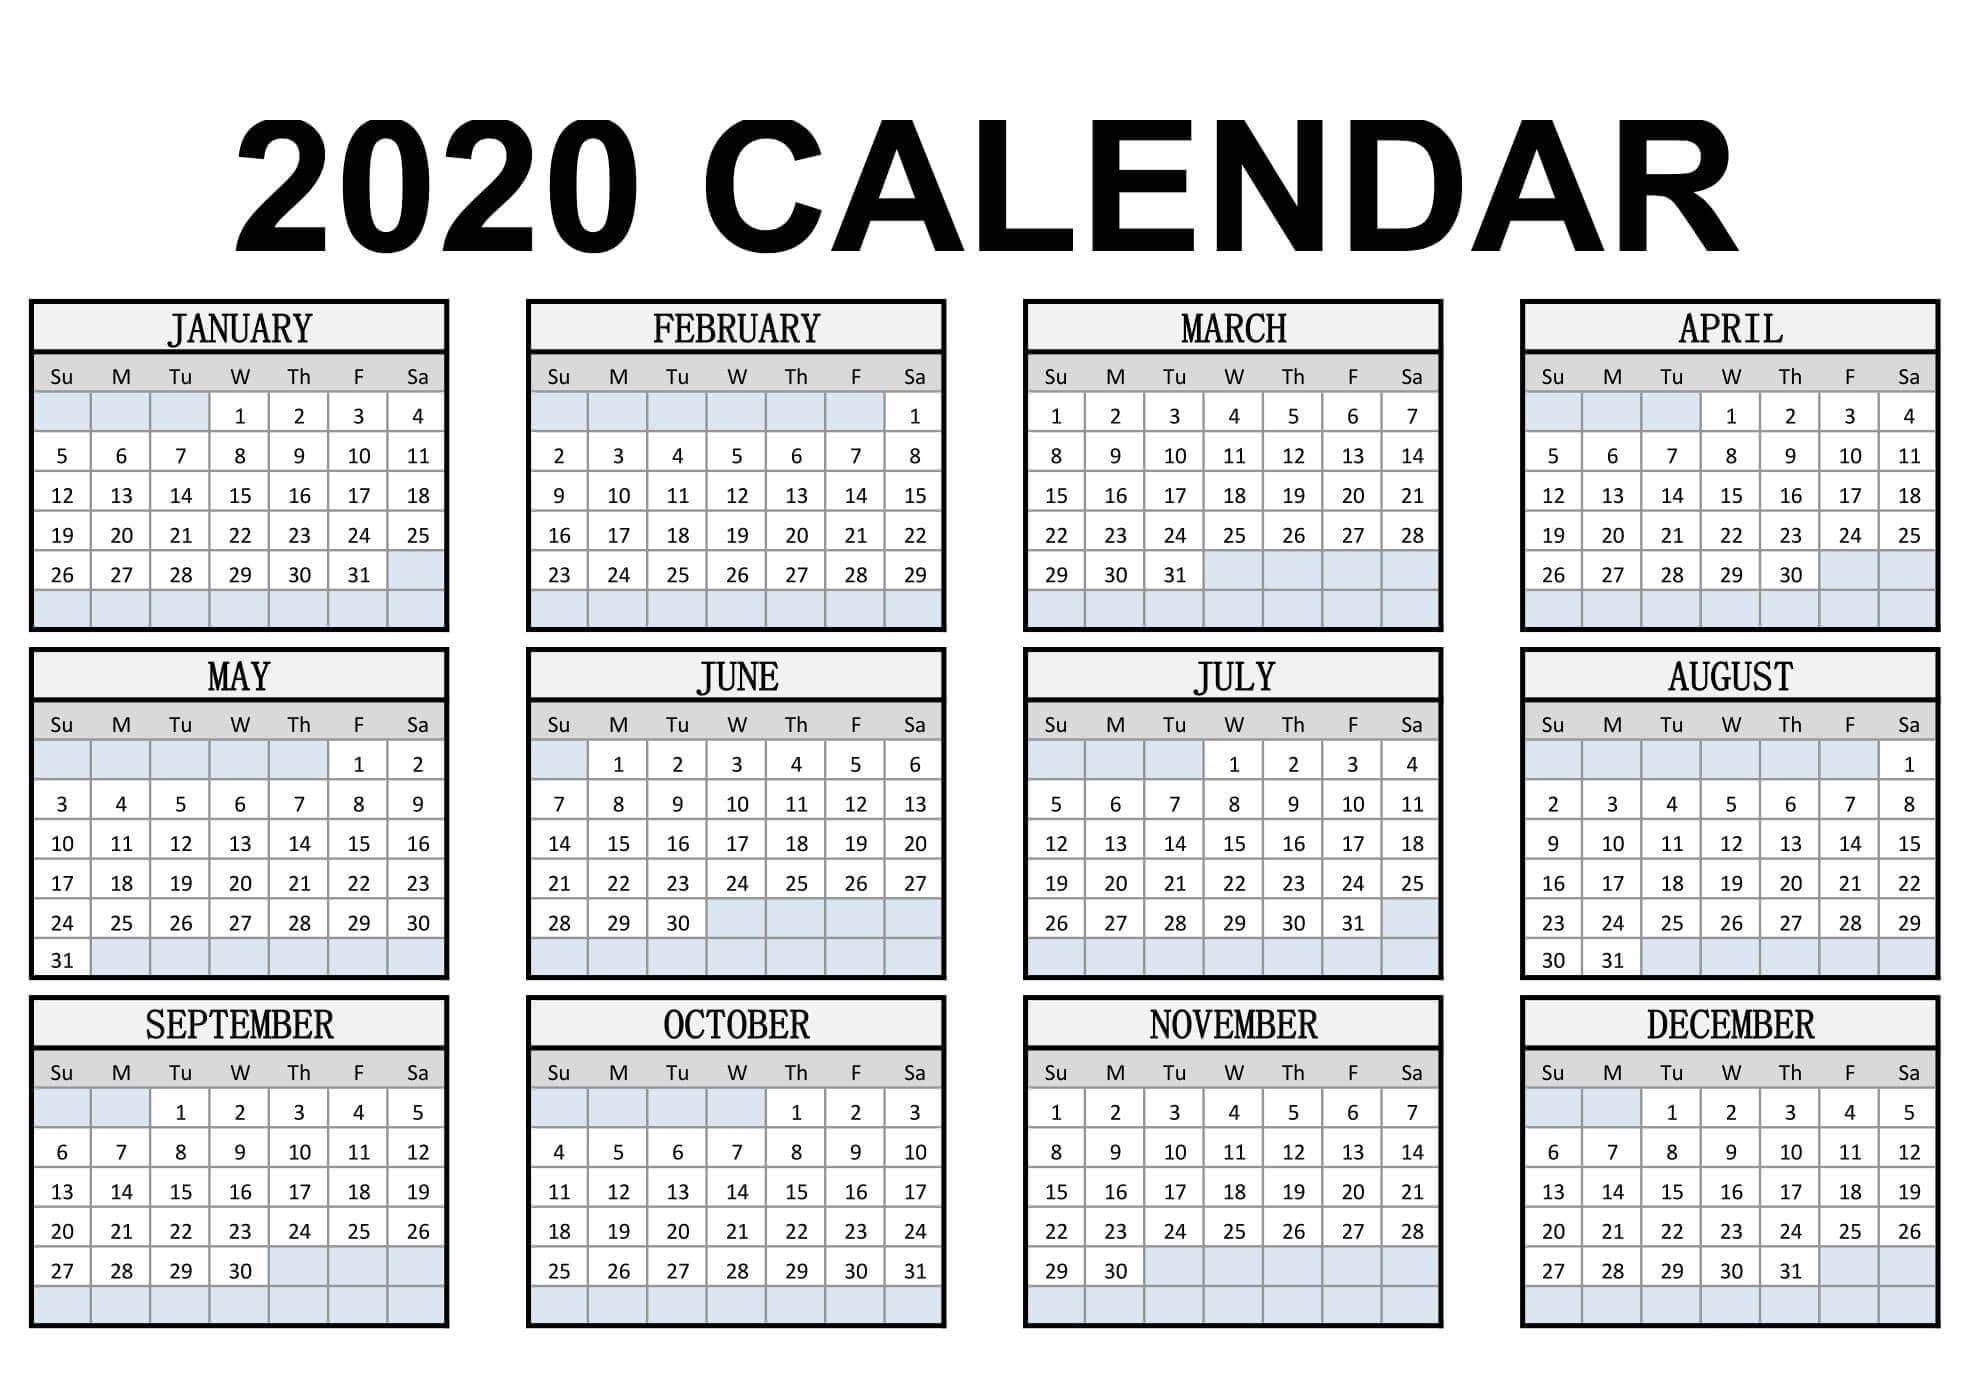 Calendar Year 2020 Holidays Template - 2019 Calendars For 2020 Writeable Year At A Glance Calendar In Excel